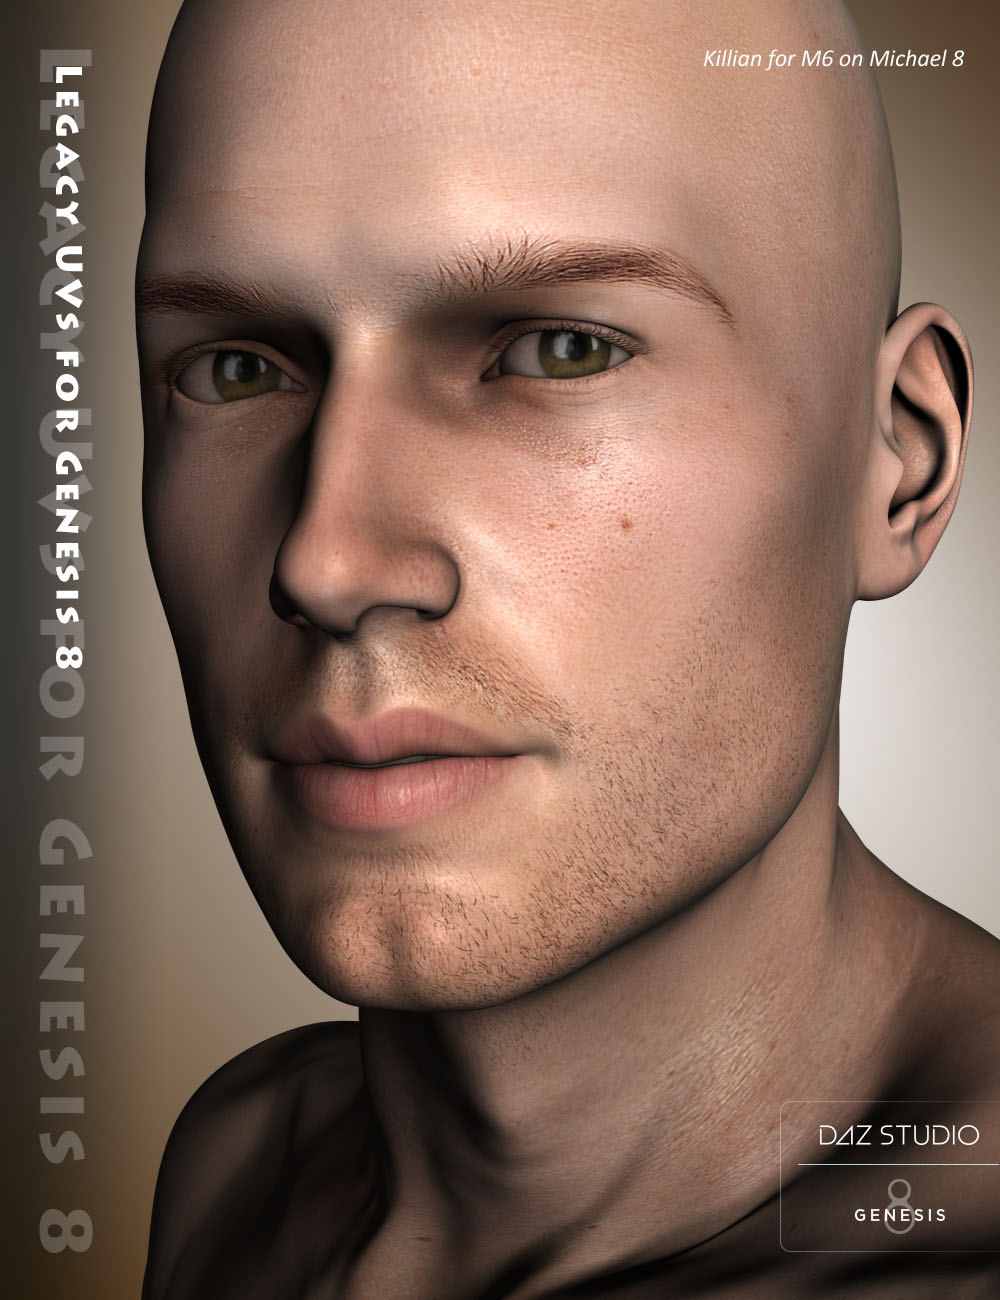 Legacy UVs for Genesis 8: Genesis 2 Male, Michael 5 and Michael 6 by: Cayman Studios, 3D Models by Daz 3D